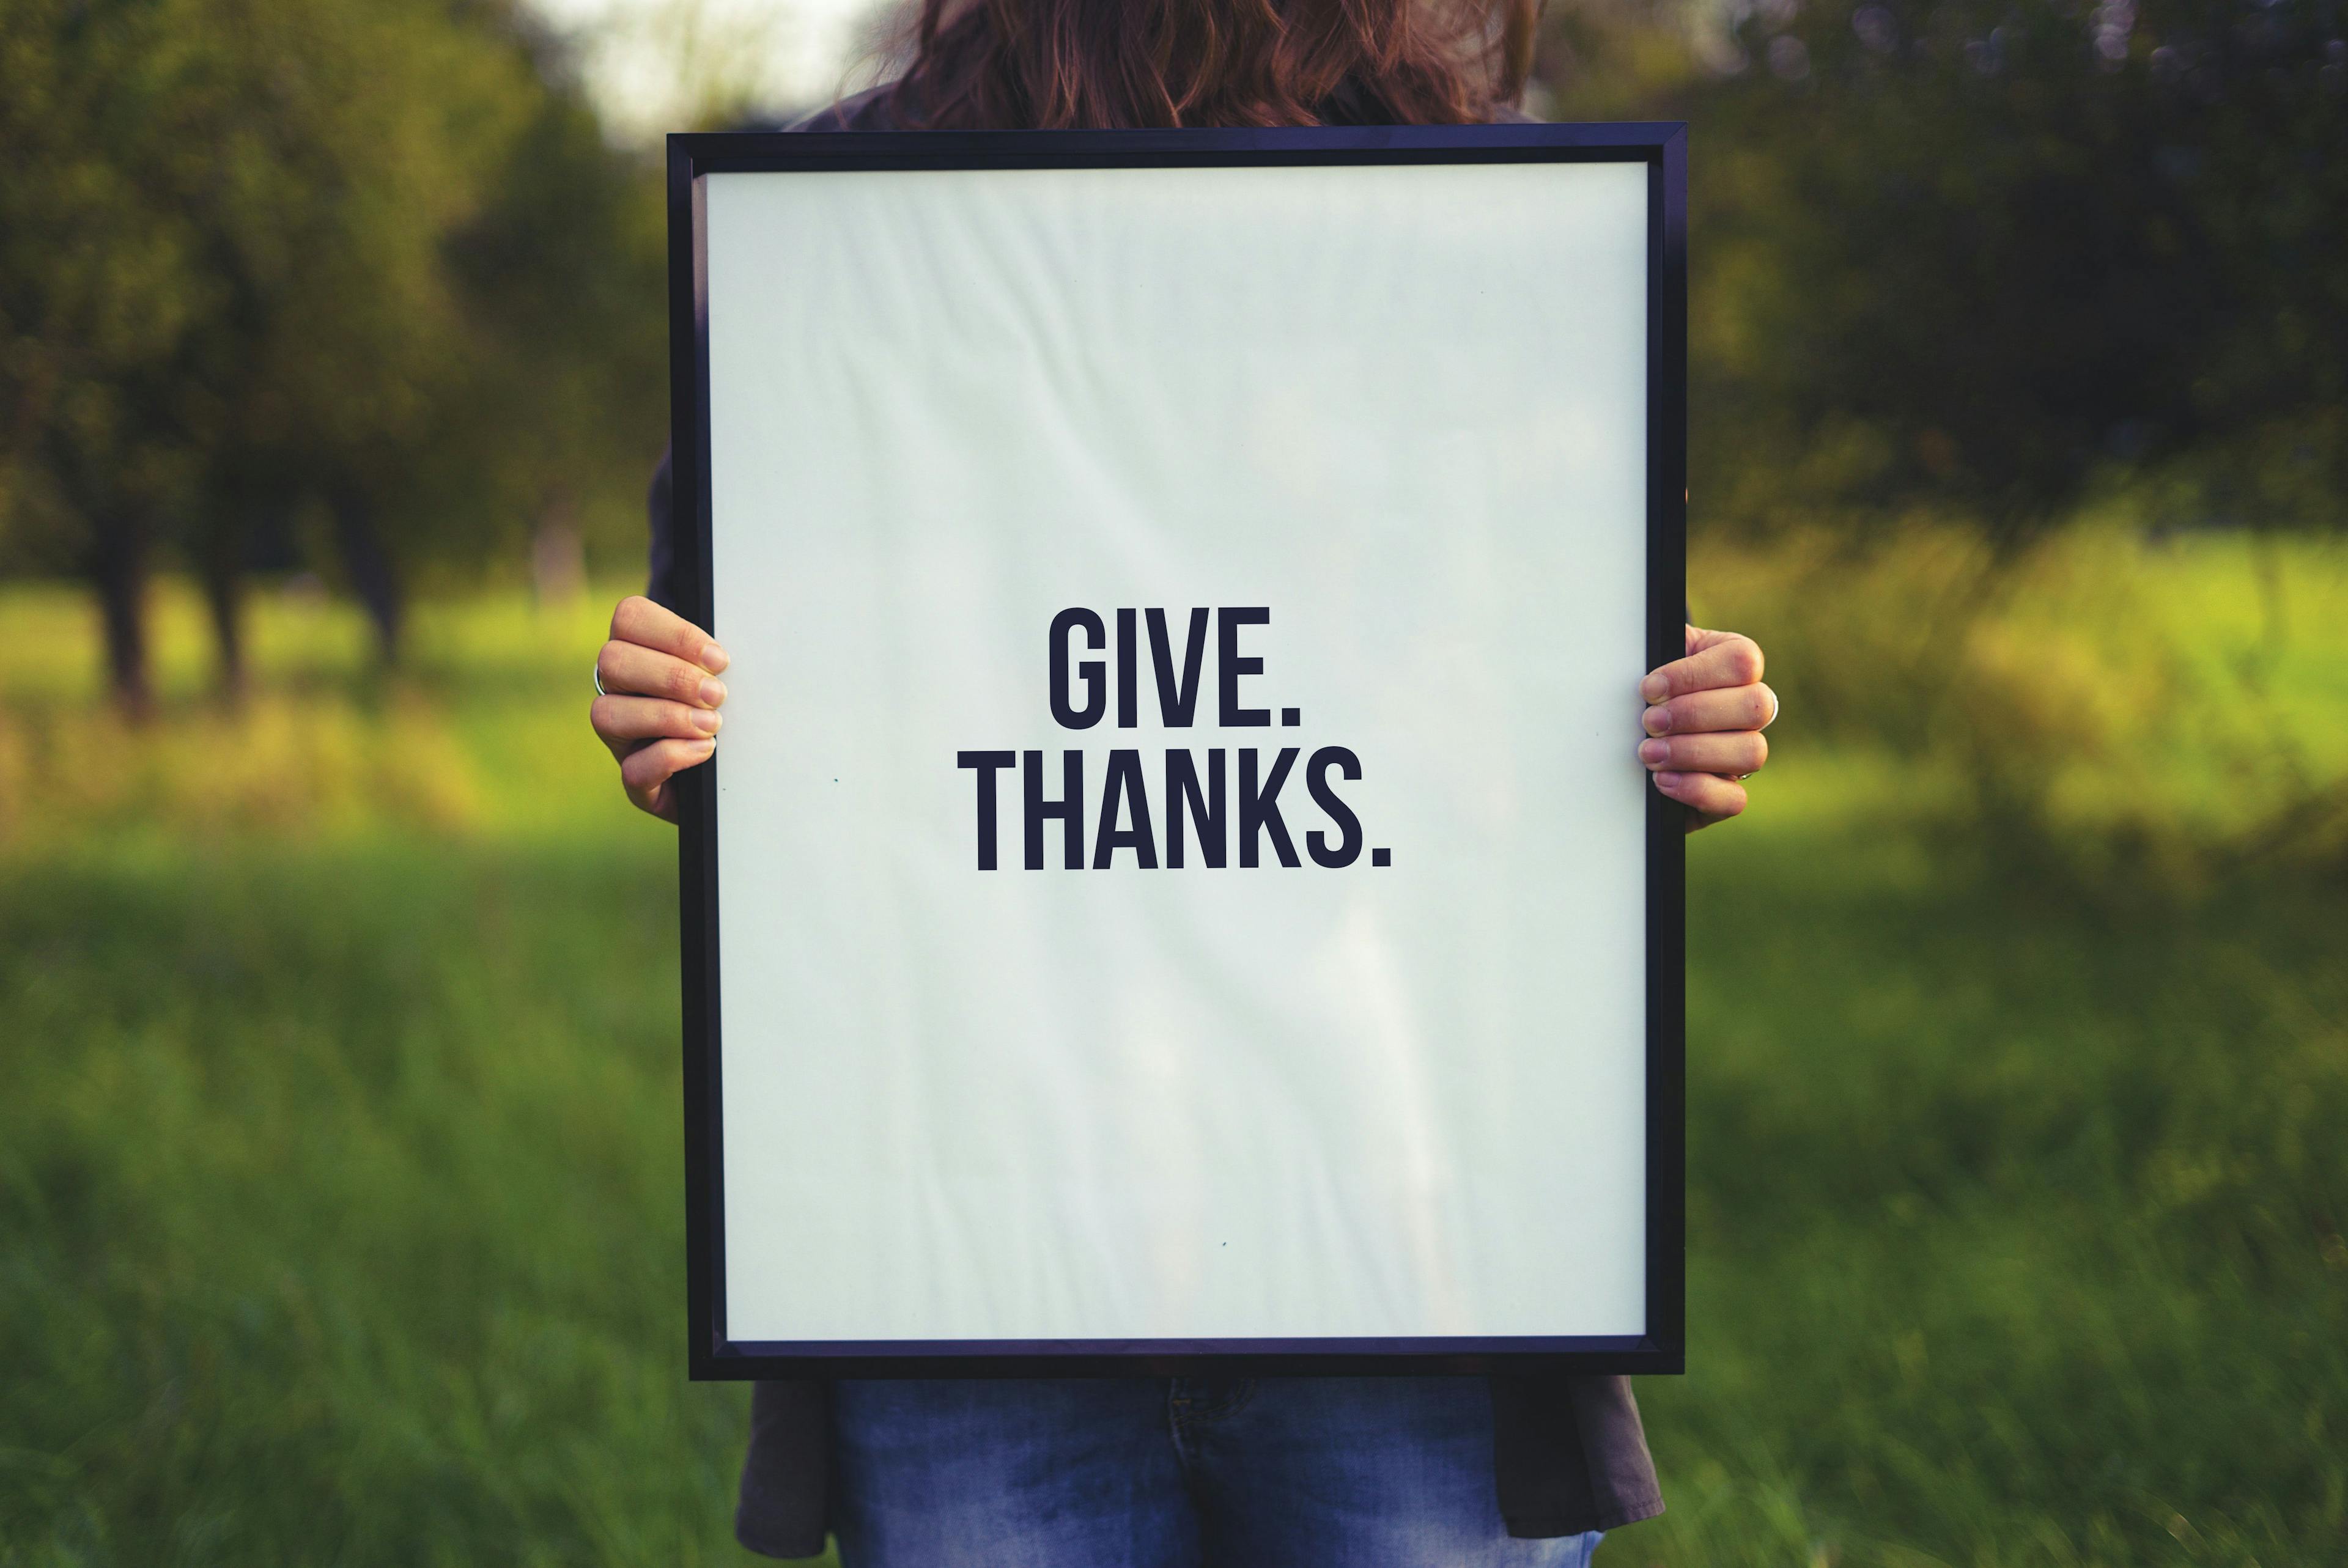 Cancer Survivors and Caregivers Share What They Were Most Thankful for During Their Journey